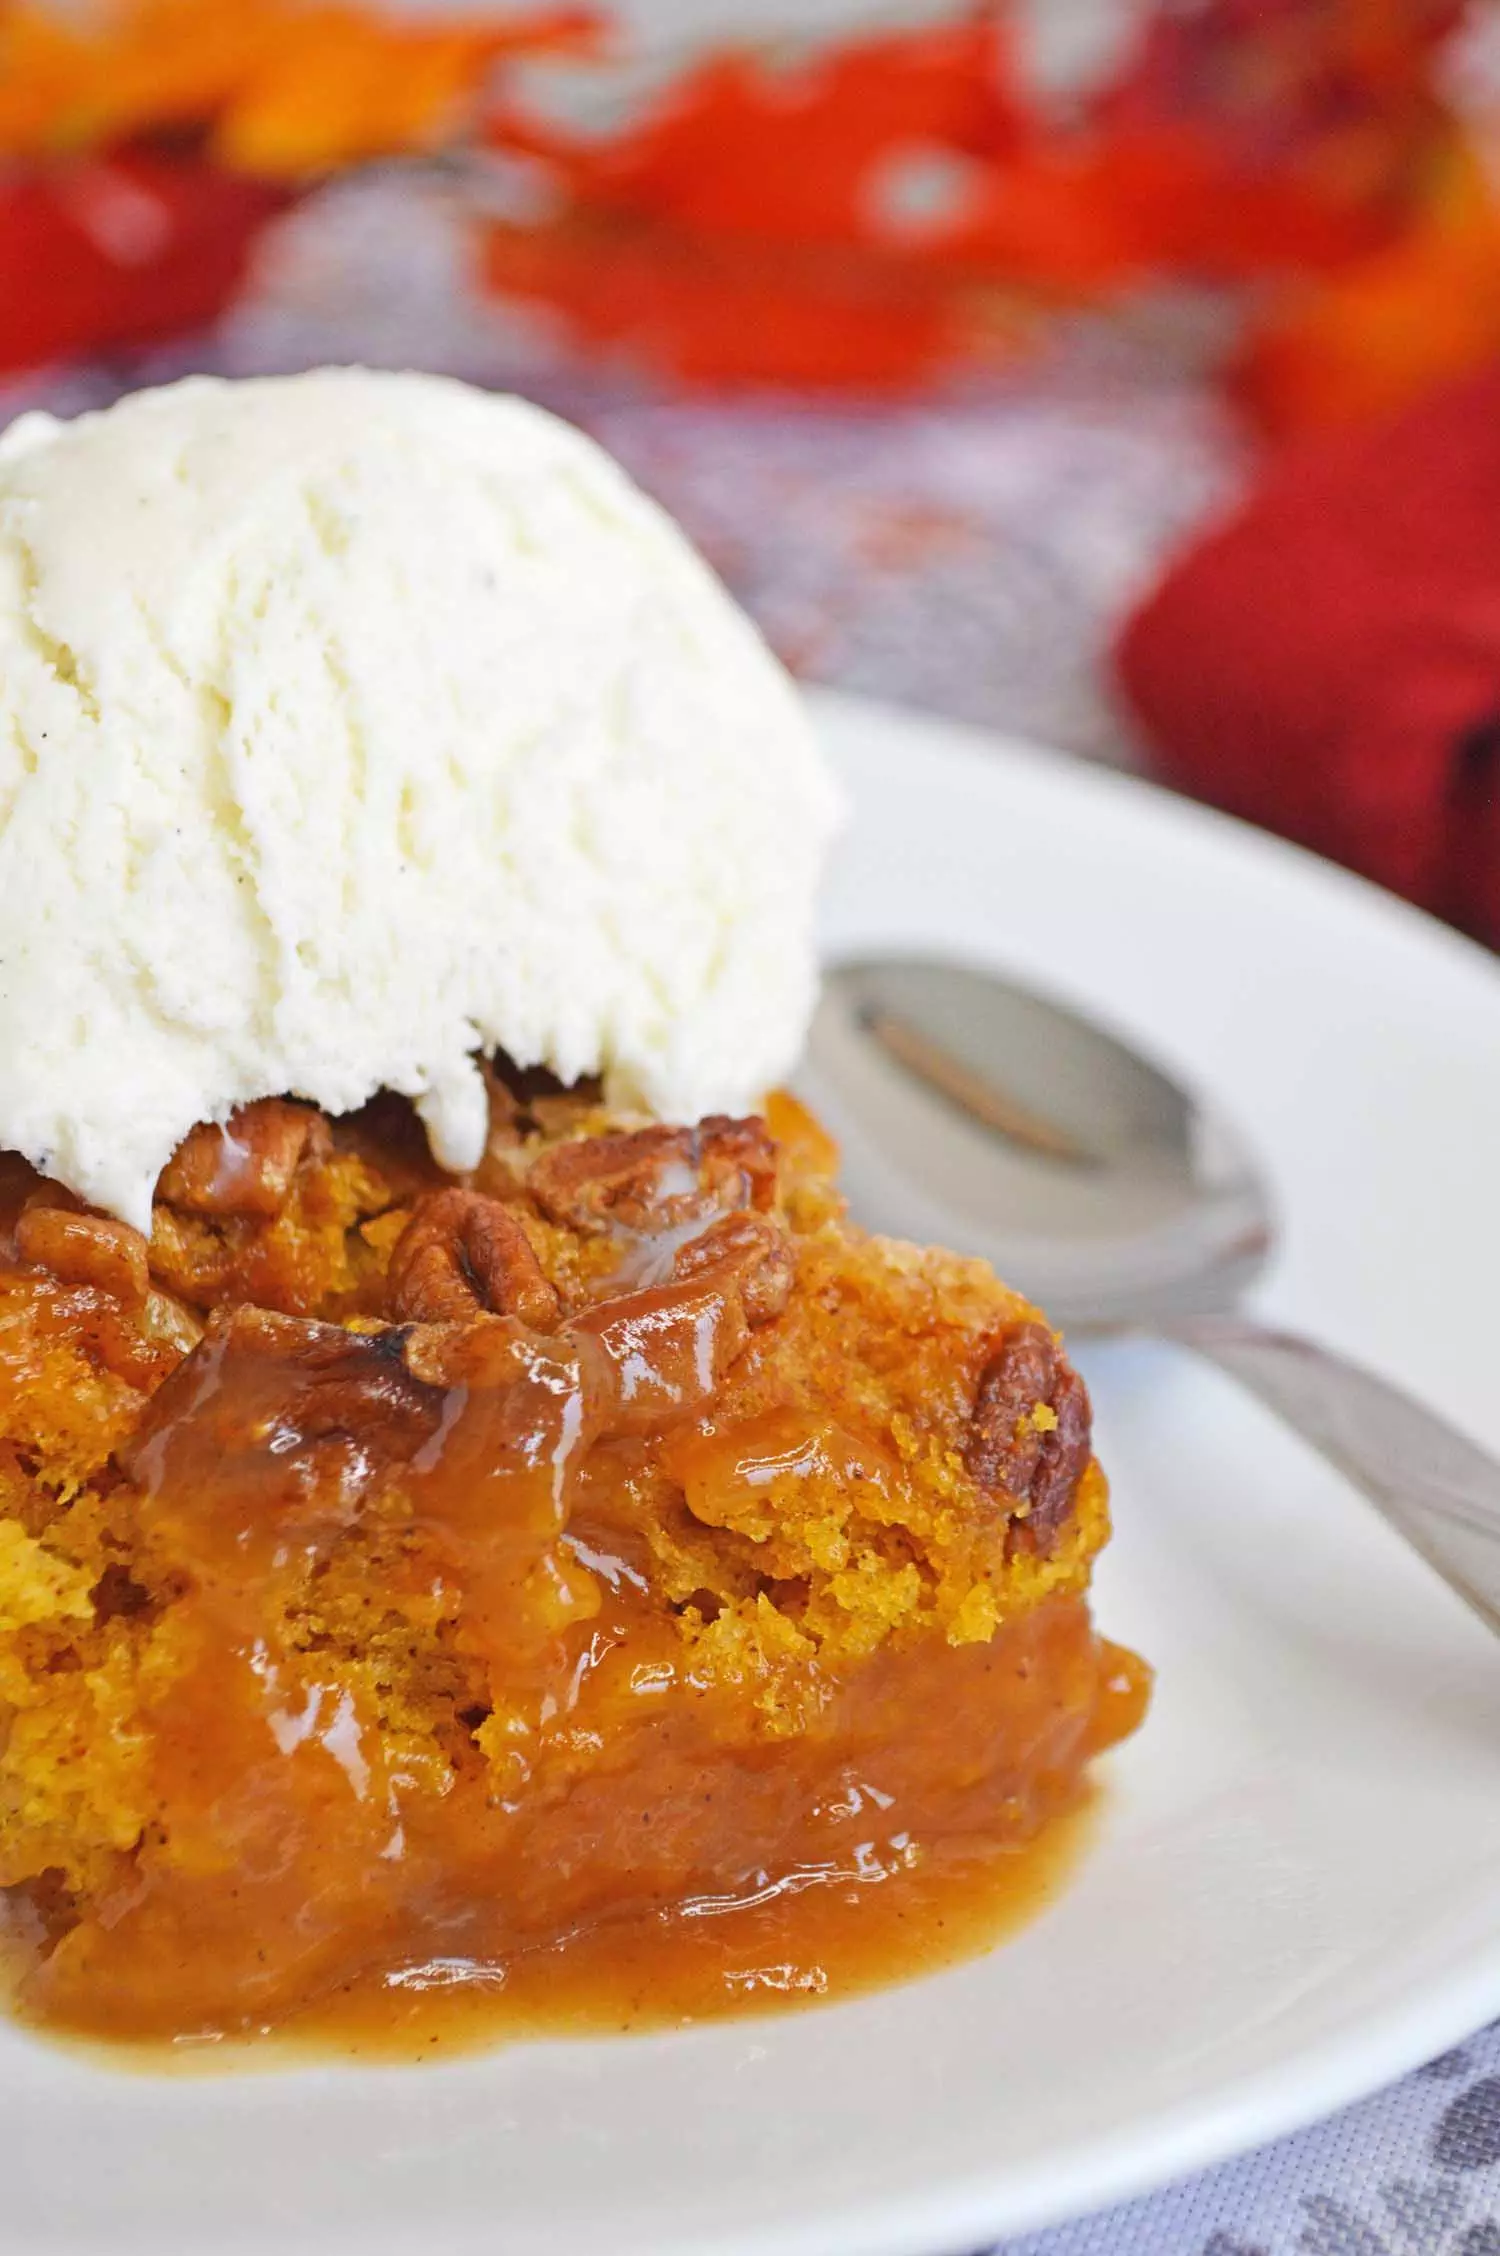 pumpkin upside down cake on a plate with ice cream